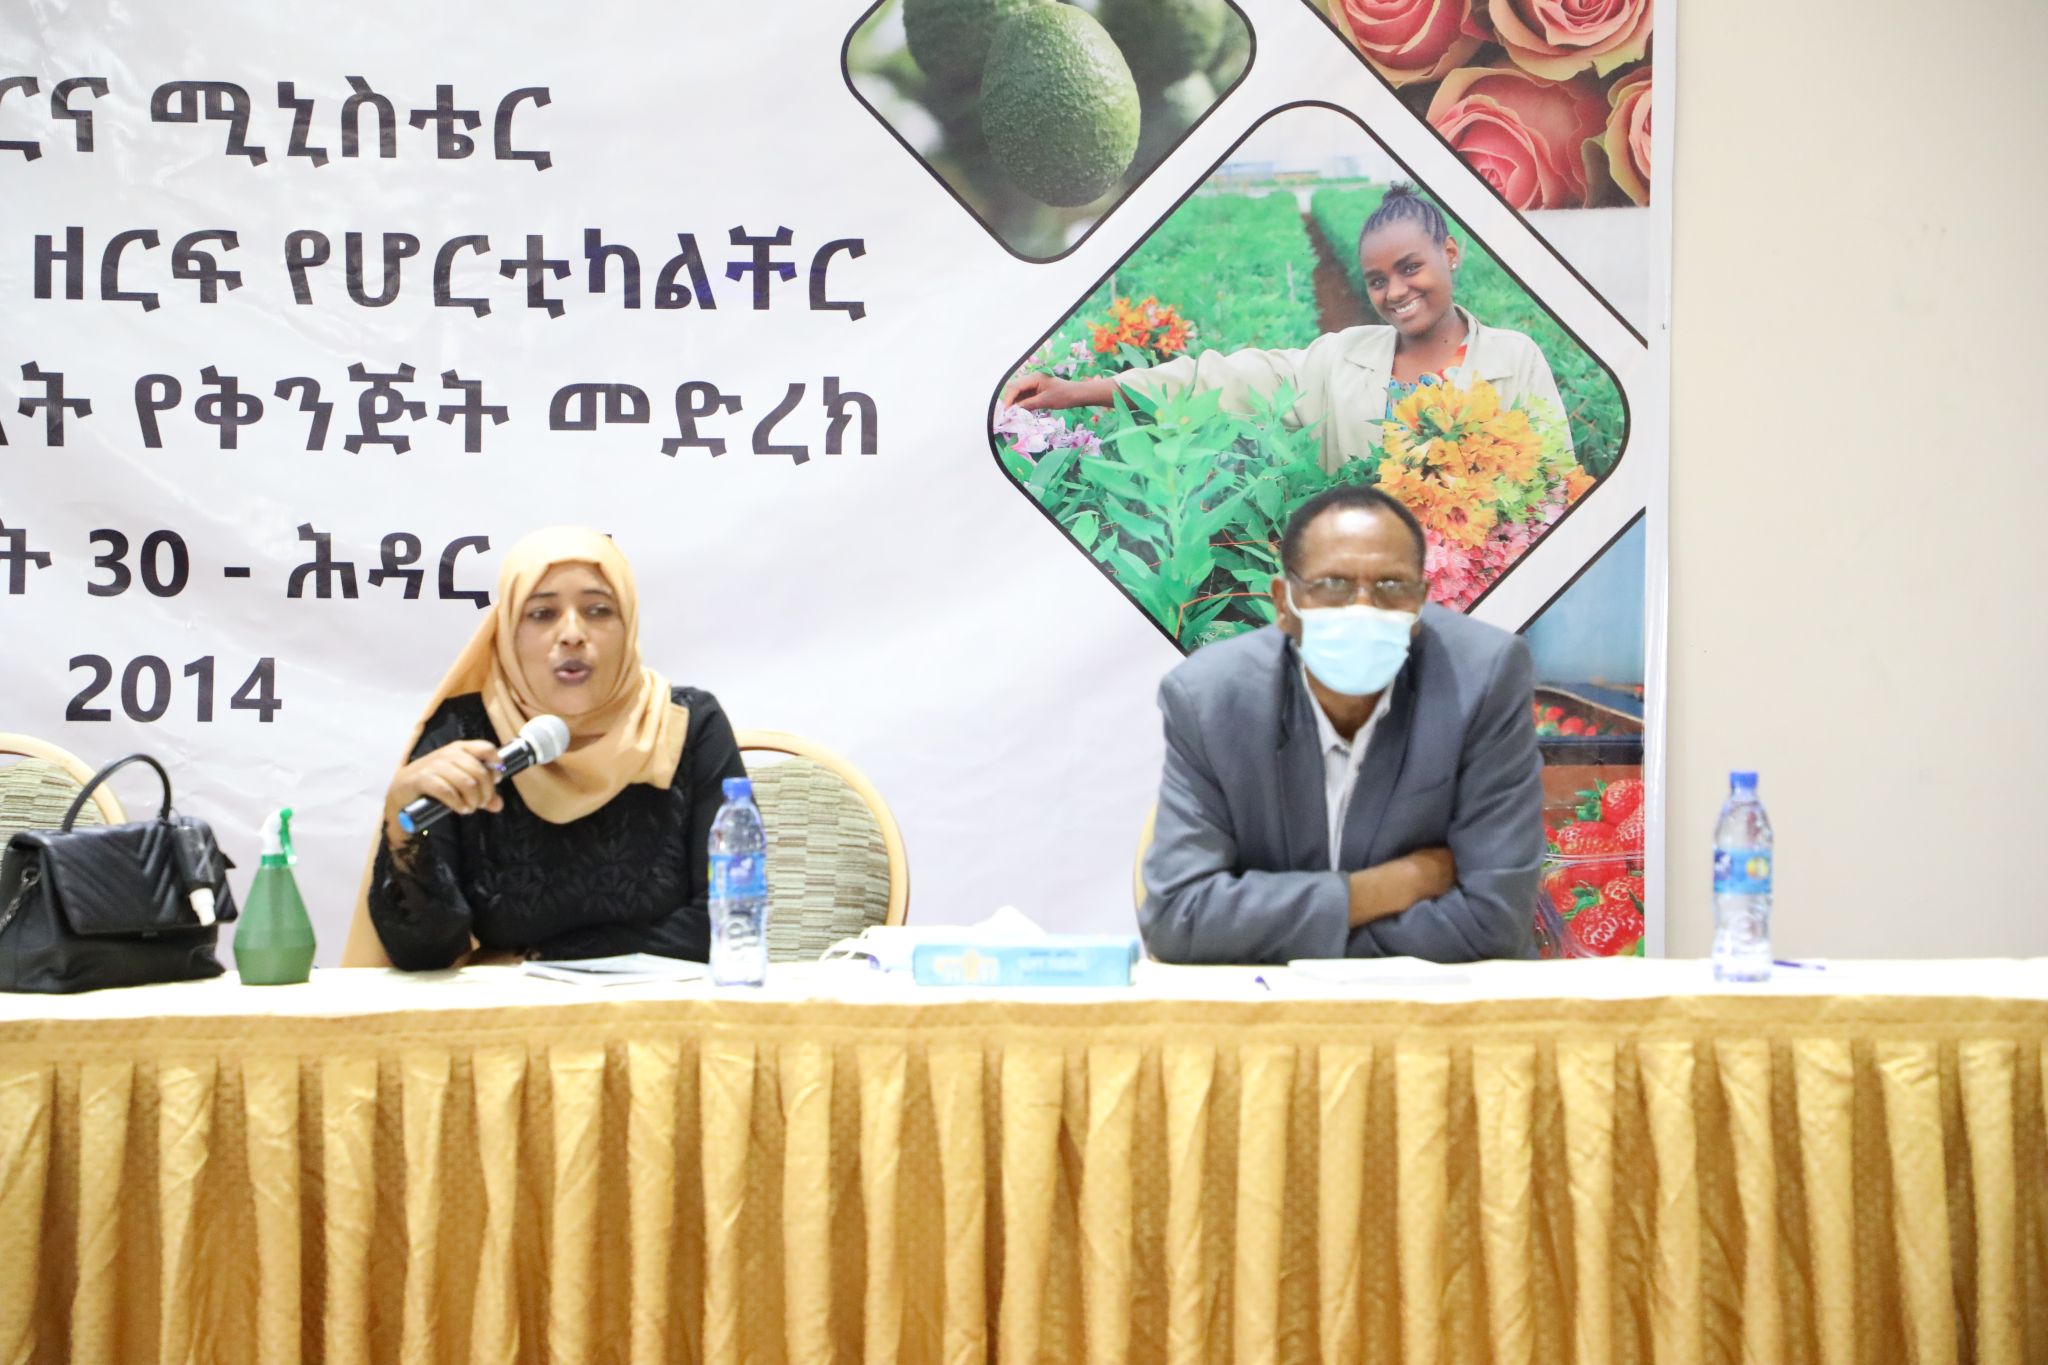 EHPEA in collaboration with the Ministry of Agriculture organized a discussion platform on the Ethiopian Horticulture investment challenges